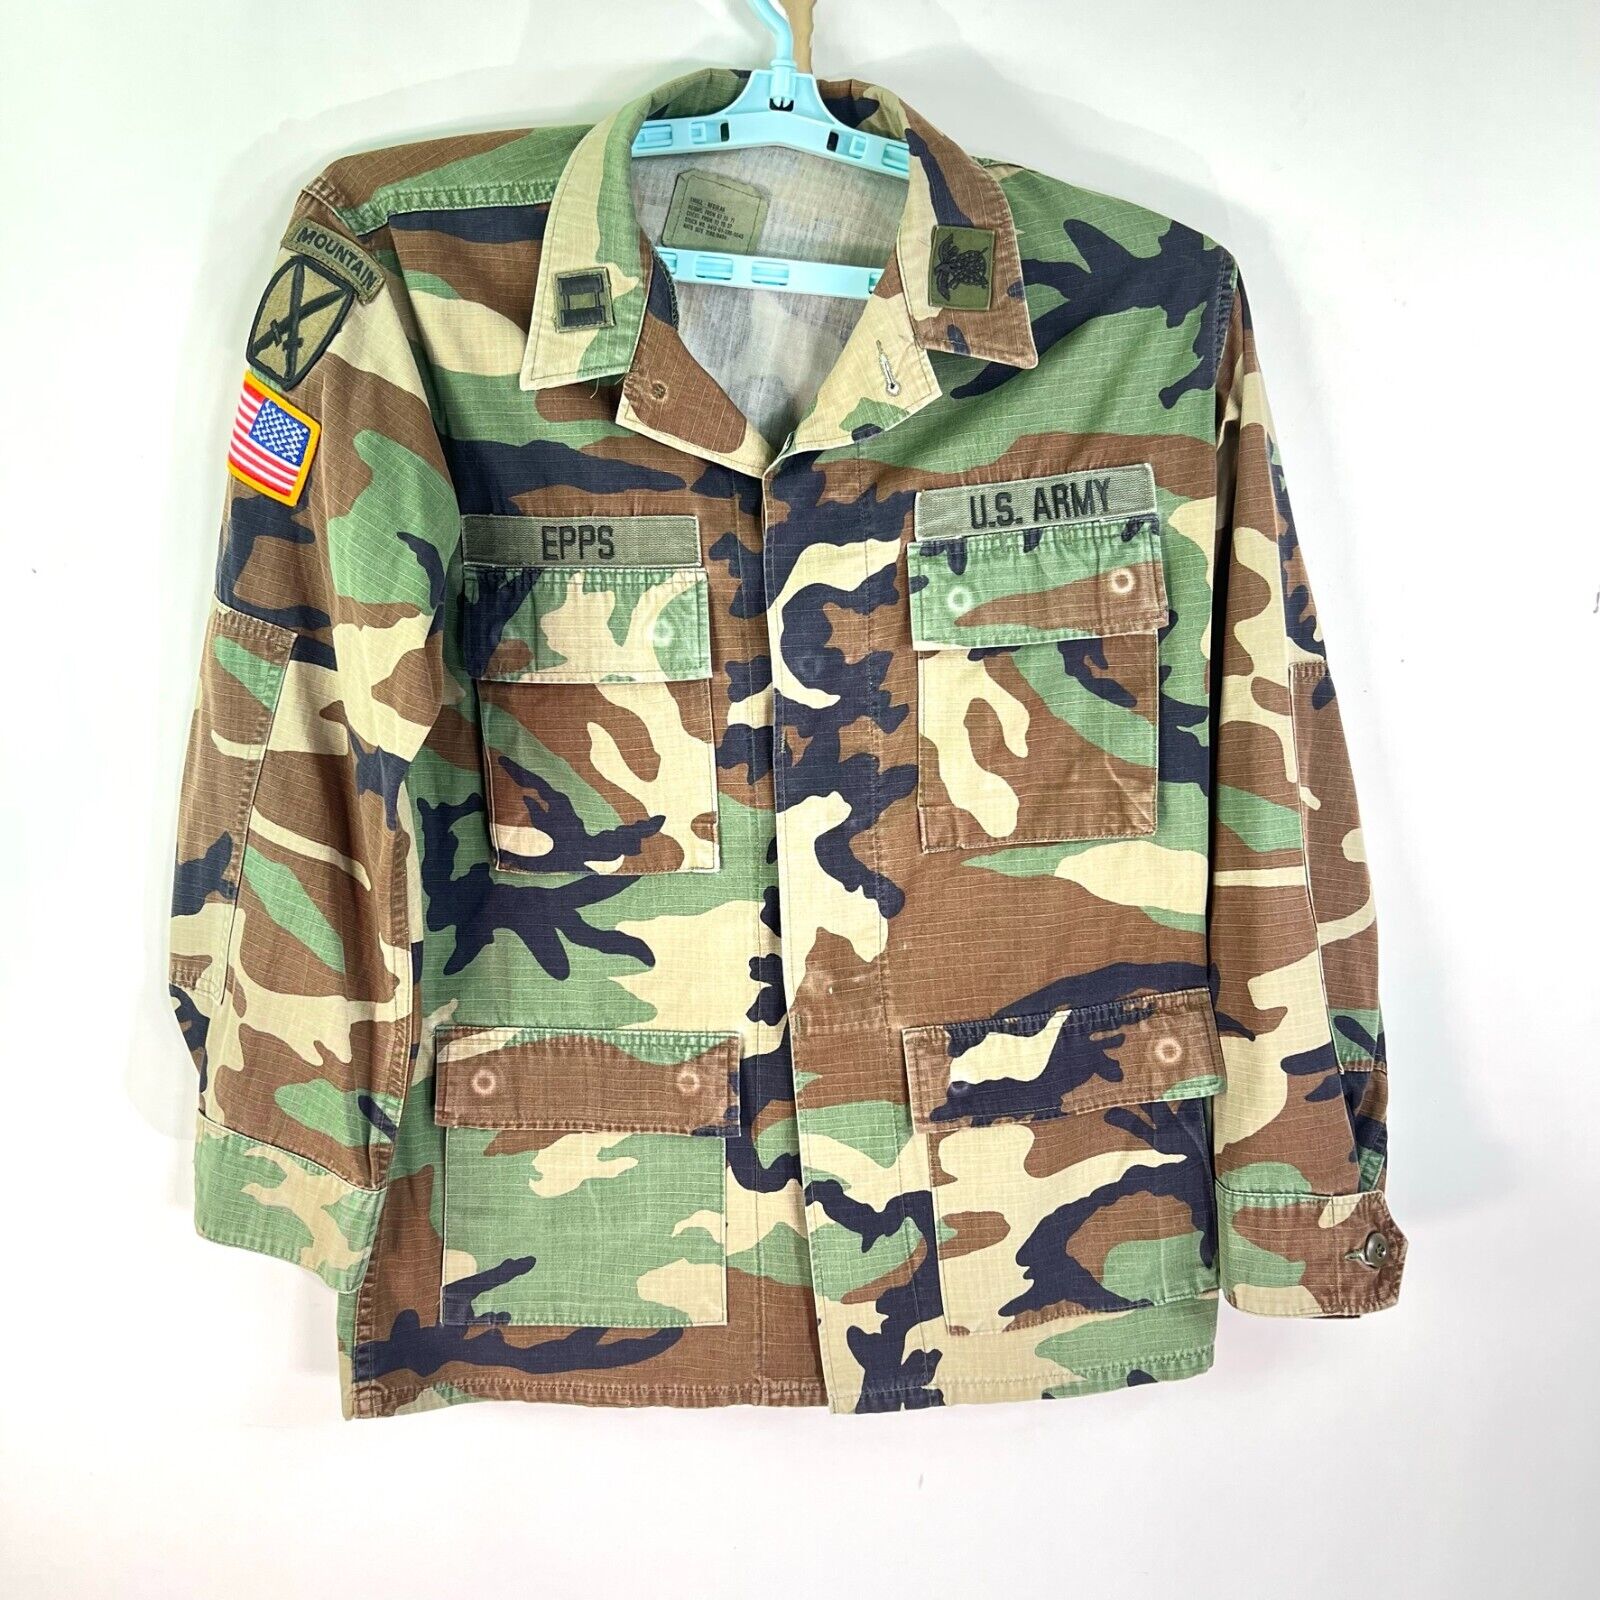 VTG US ARMY Patches Camo RIPSTOP Cotton BDU Coat Small Reg